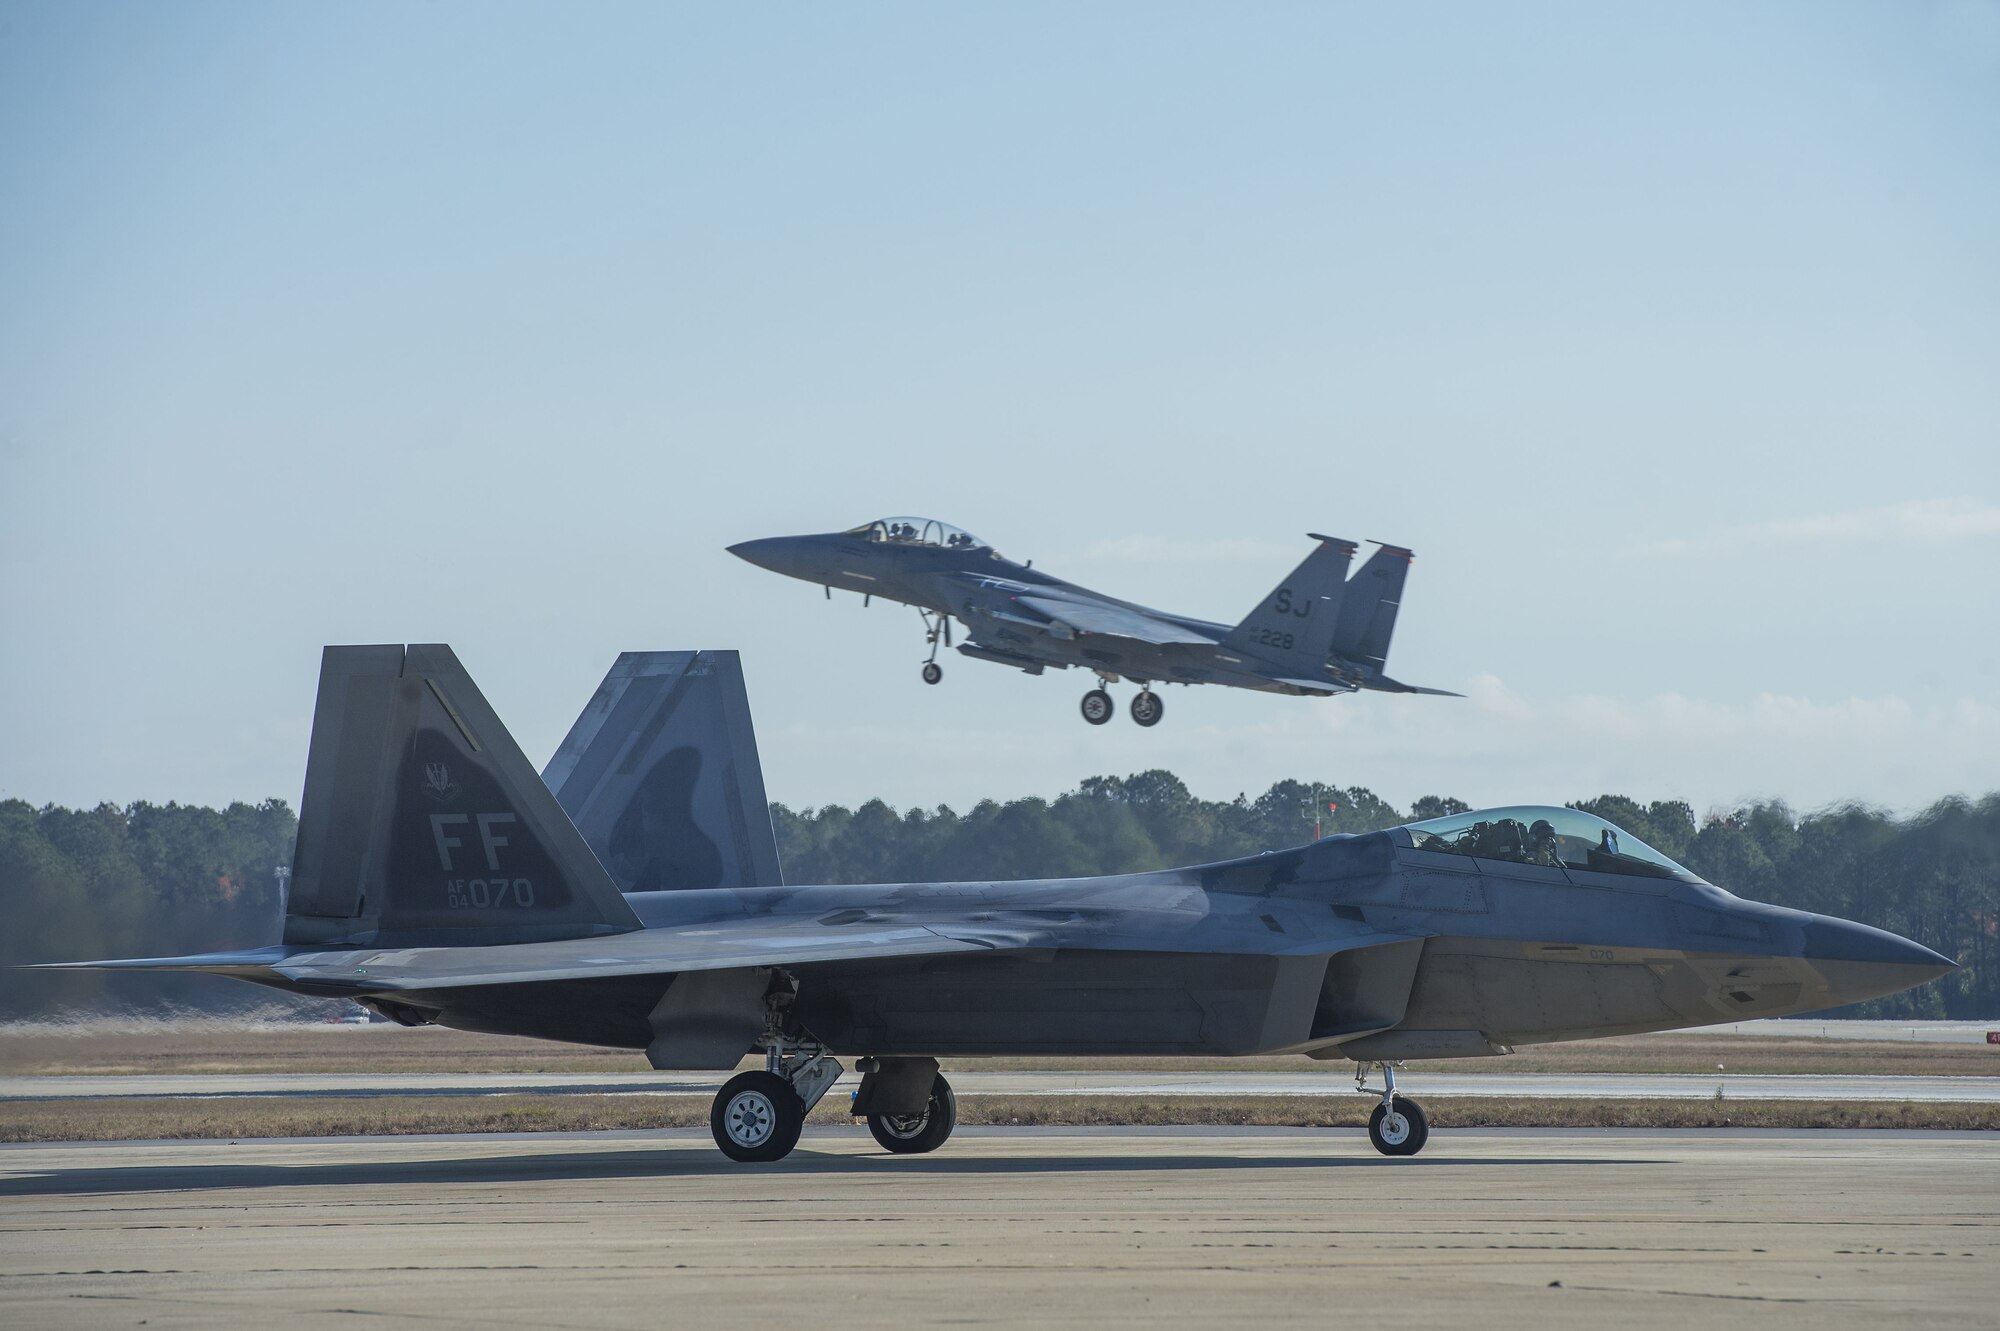 A U.S. Air Force F-22 Raptor assigned to the 94th Fighter Squadron taxis into a designated parking space while another takes off at Shaw Air Force Base, S.C., Nov. 29, 2017. The F-22s spent time at Shaw in order to certify the newest member of the F-22 Raptor Demonstration Team, U.S. Air Force Maj. Paul Lopez, F-22 Raptor Demonstration Team pilot. (U.S. Air Force photo by Staff Sgt. Zade Vadnais)